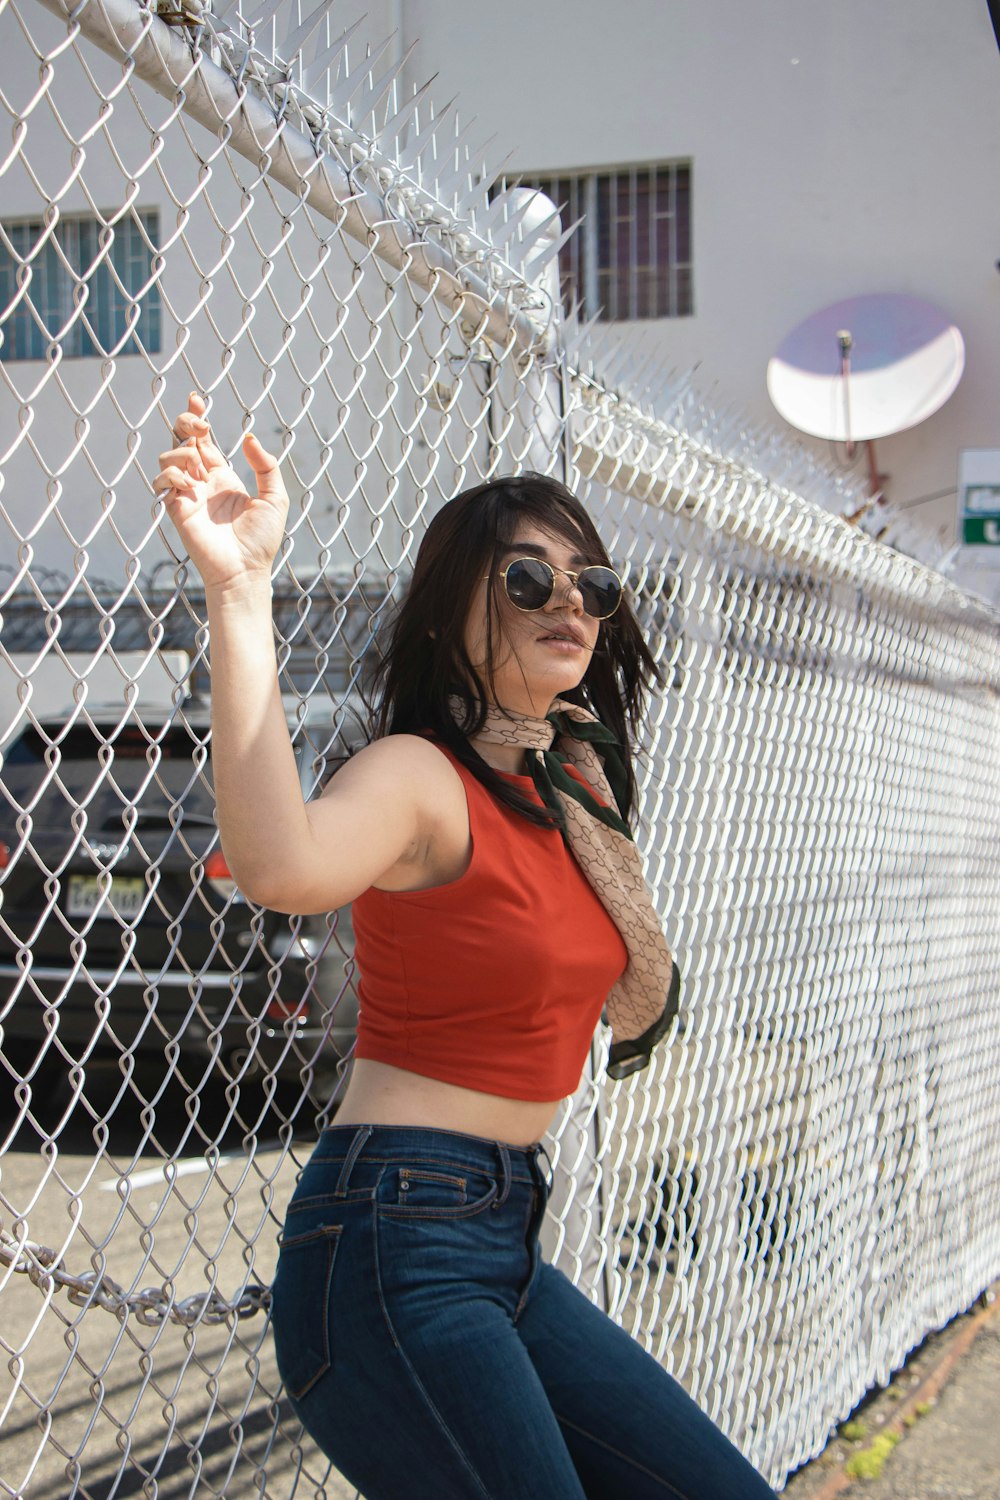 Woman in red tank top and blue denim shorts leaning on gray metal fence  during daytime photo – Free Human Image on Unsplash